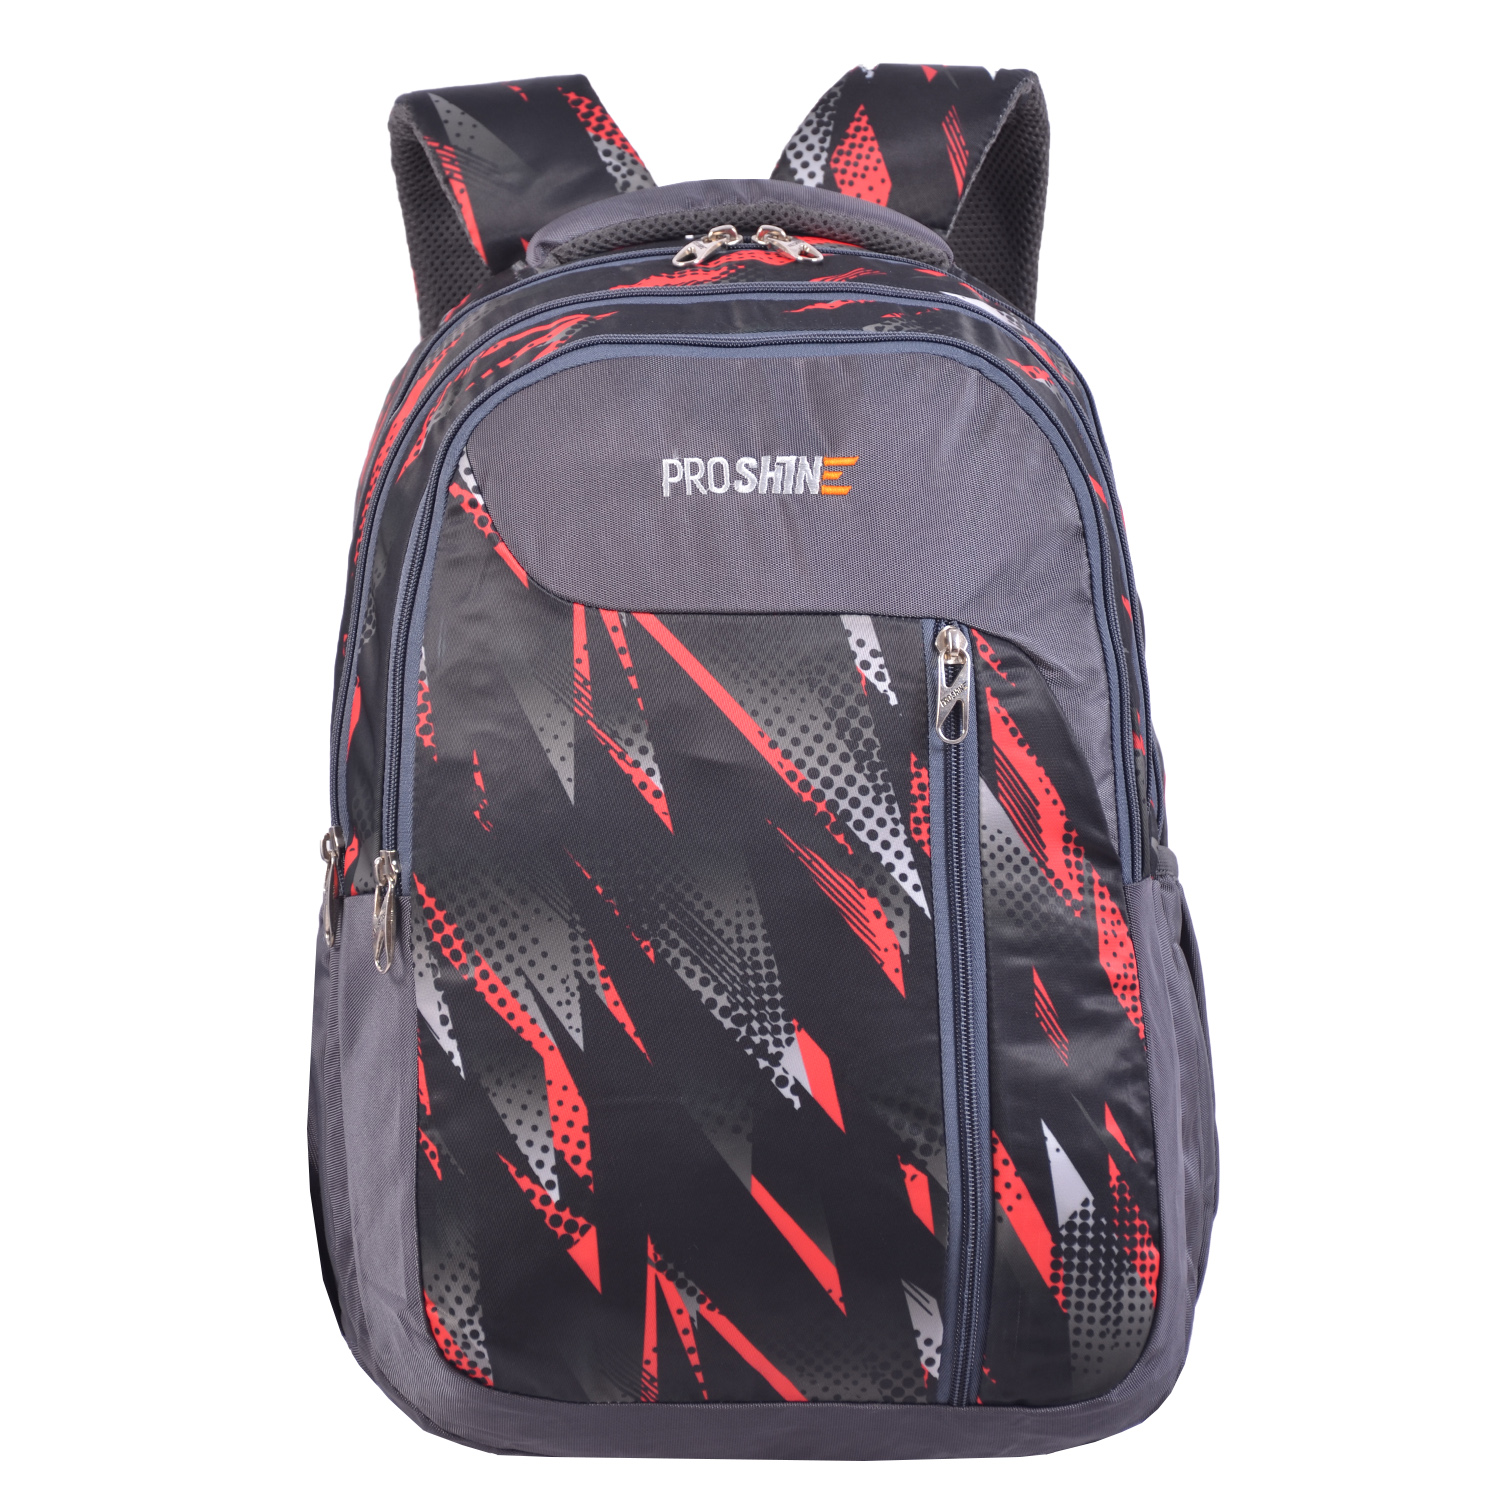 RoshanBags_PROSHINE 38L CASUAL BACKPACK A0399 GREY RED